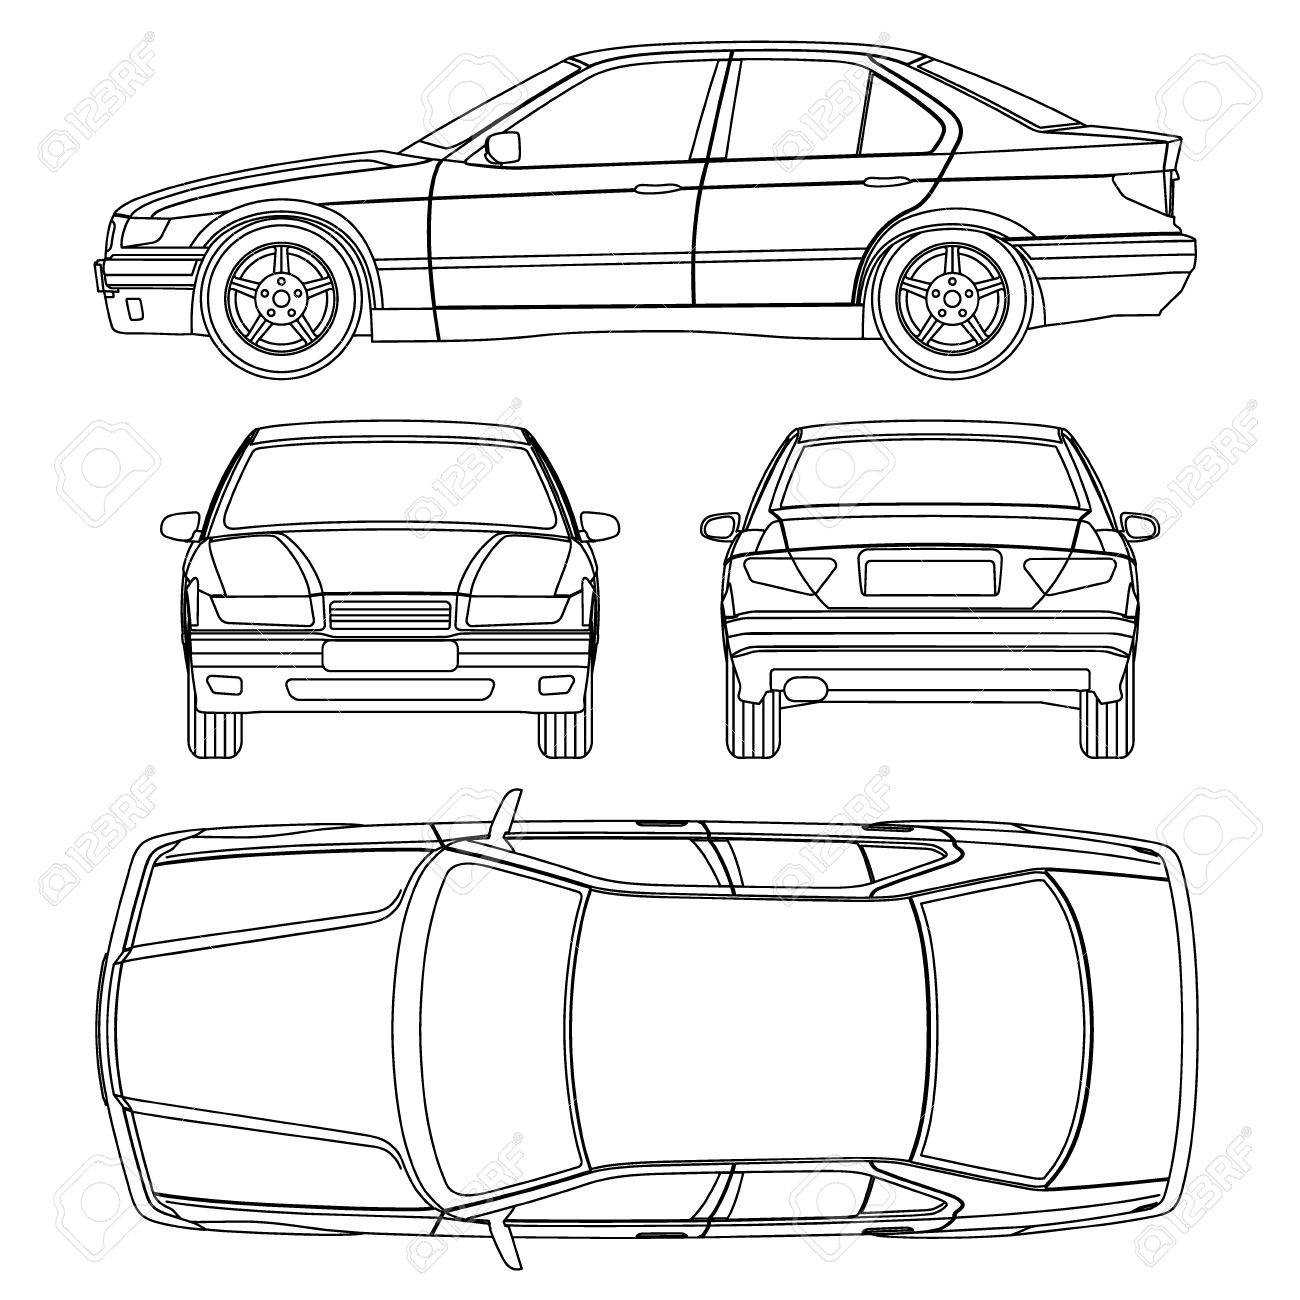 Car Line Draw Insurance Damage, Condition Report Form Inside Truck Condition Report Template